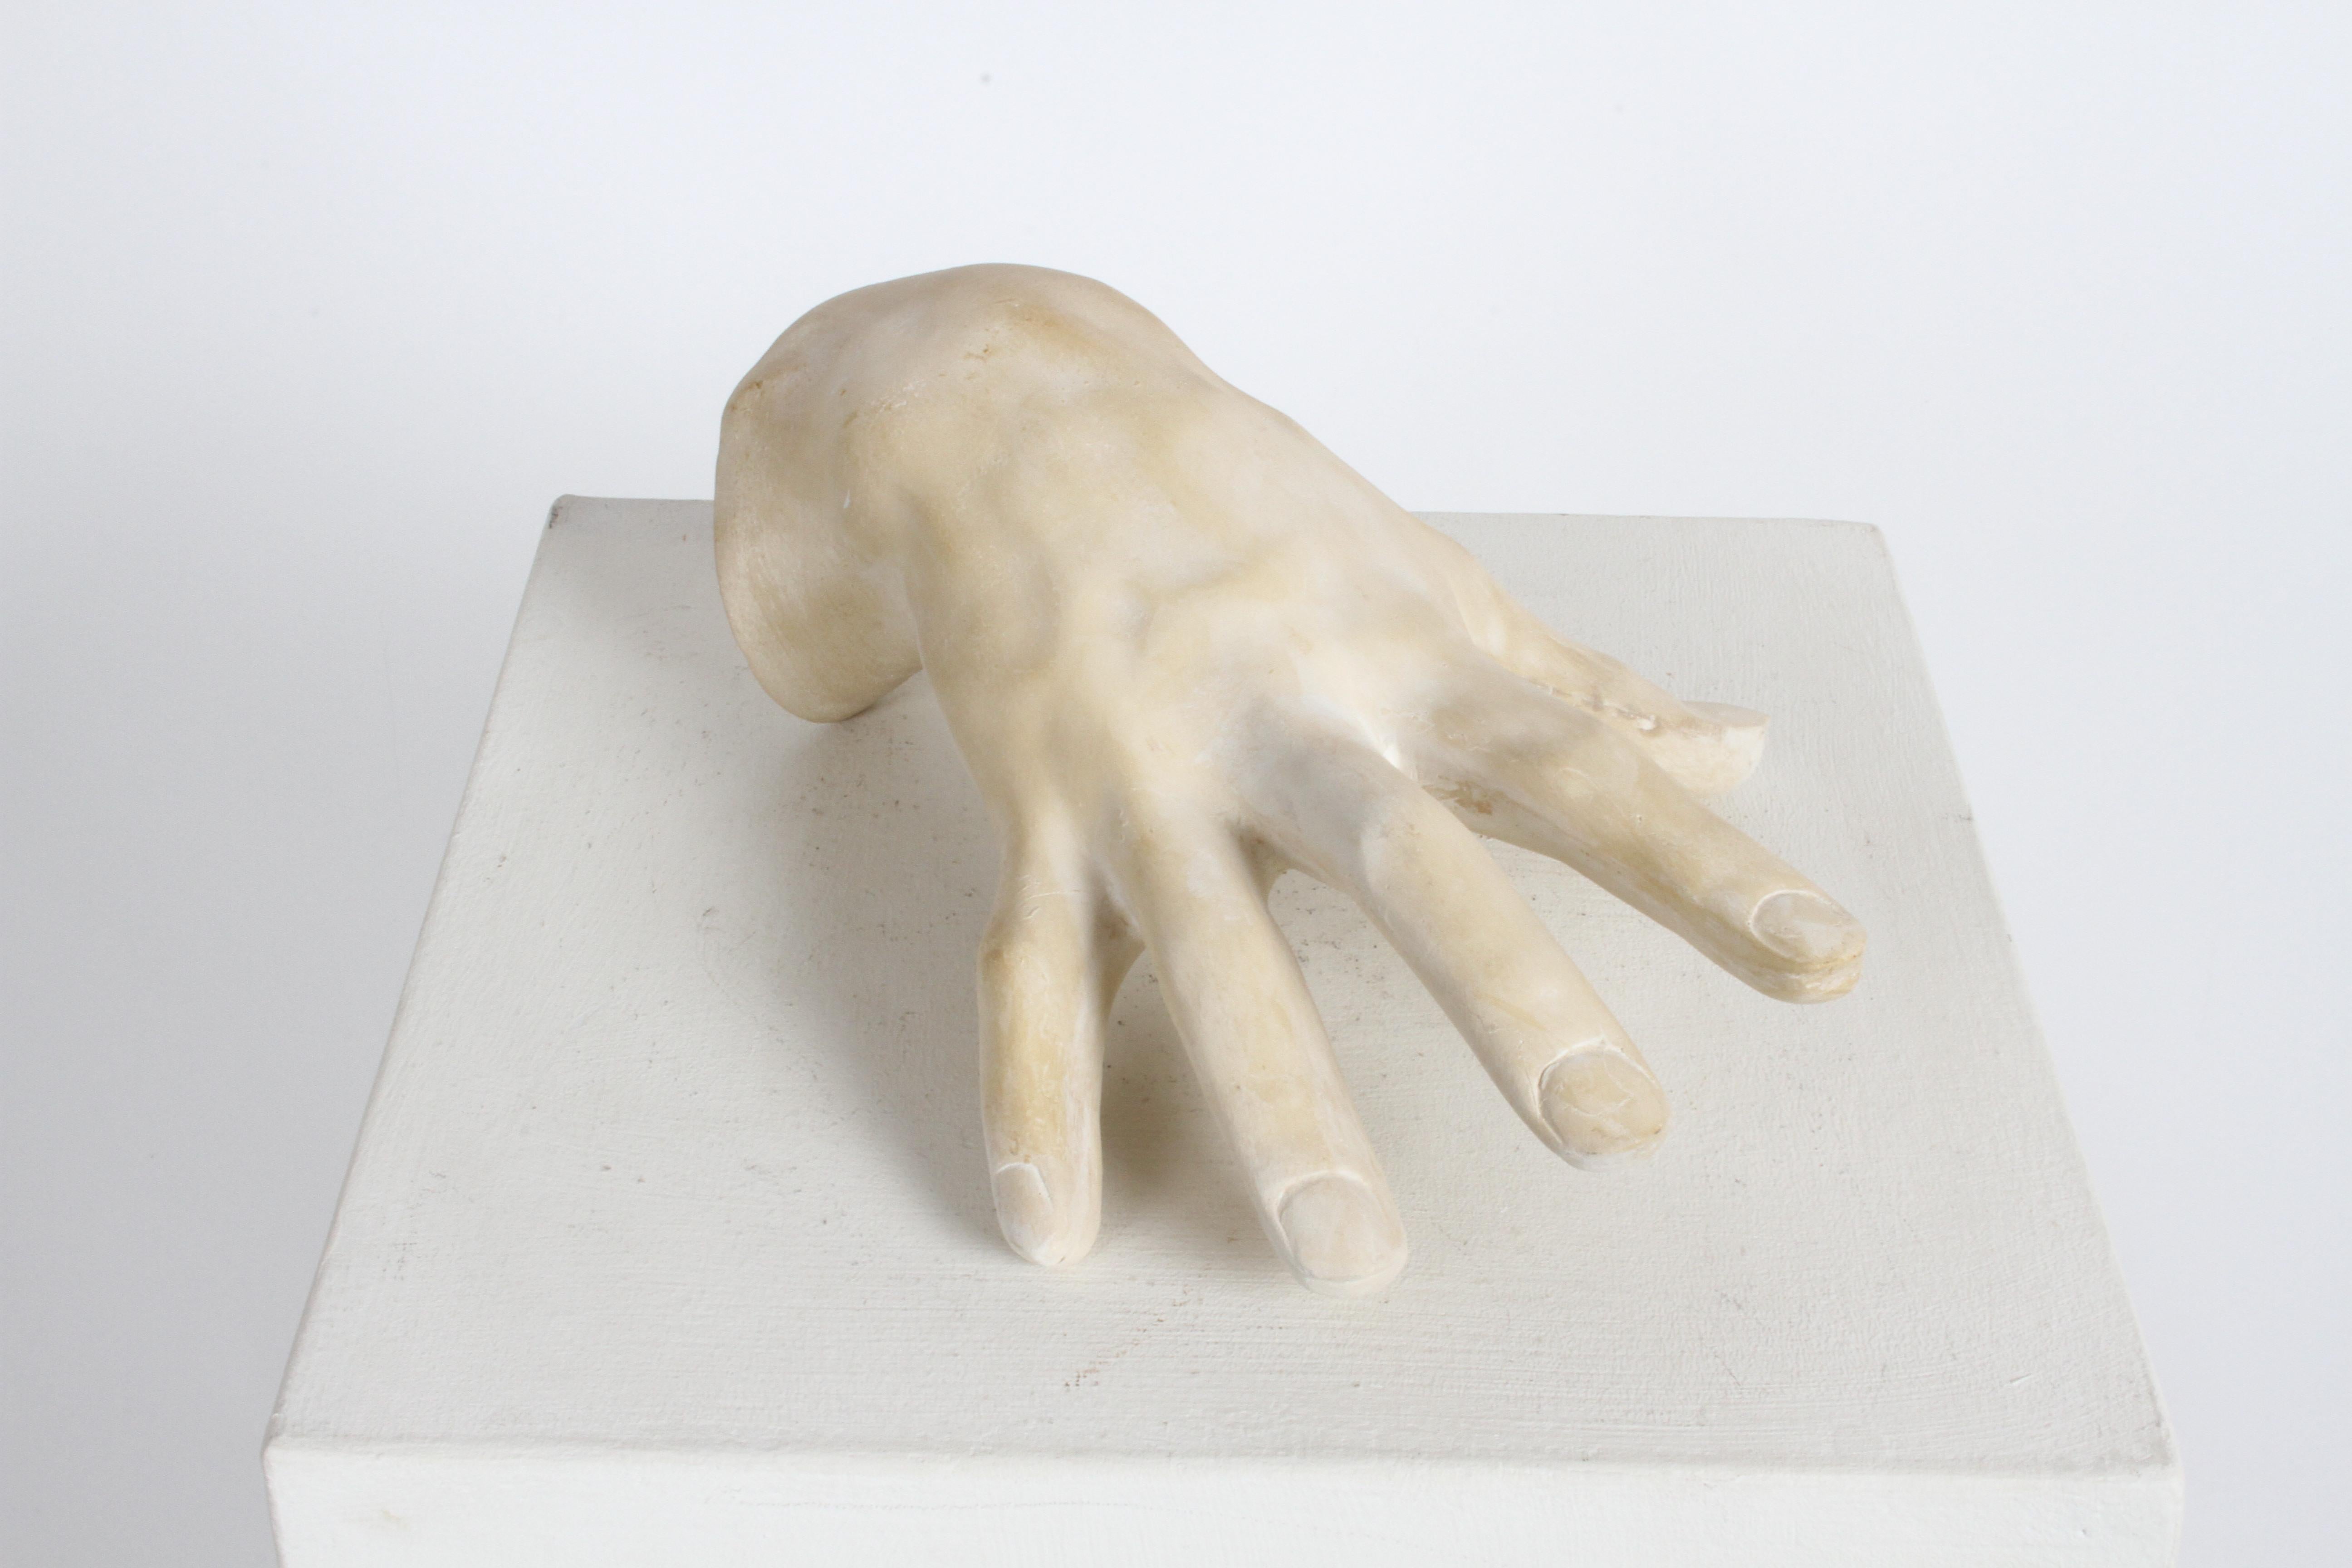 Large 1970s Plaster Artist Hand Study Table Sculpture, Style of John Dickinson For Sale 5